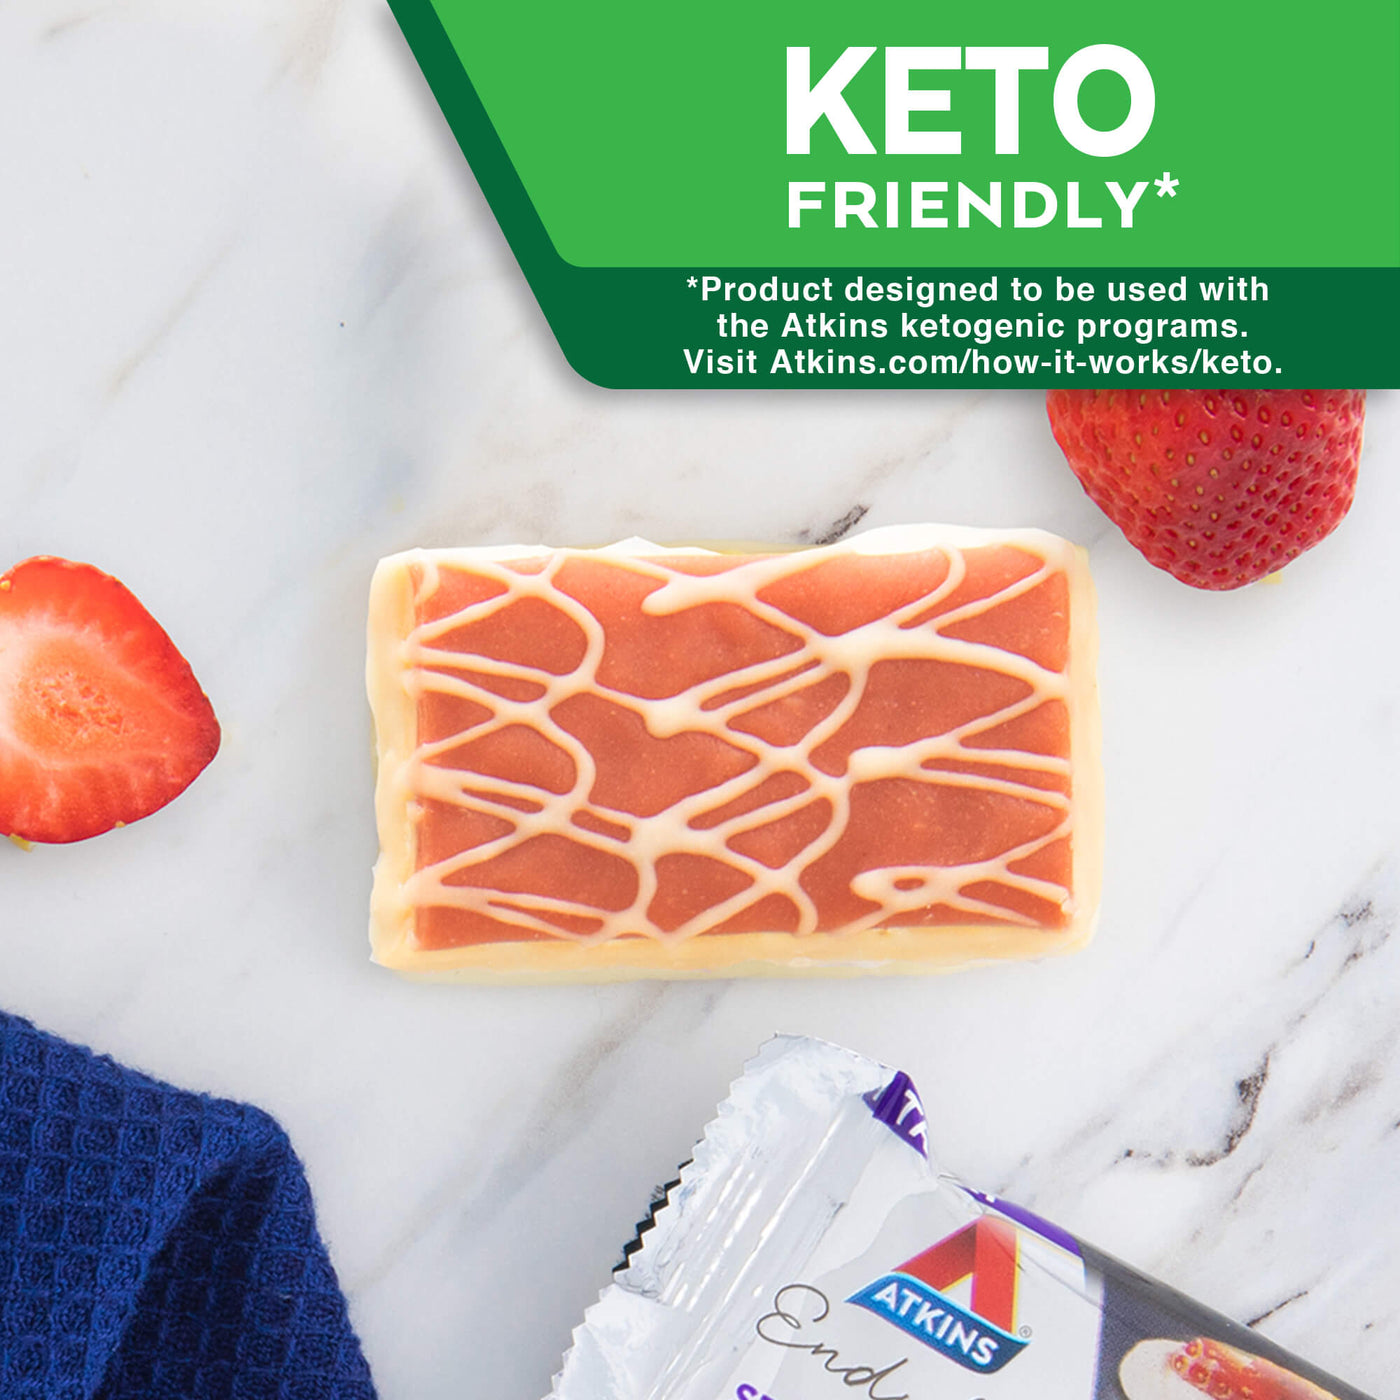 Endulge Strawberry Cheesecake Dessert Bar. Keto the Atkins Way* *Product designed to be used with Atkins ketogenic programs. Visit Atkins.com/how-it-works/keto.